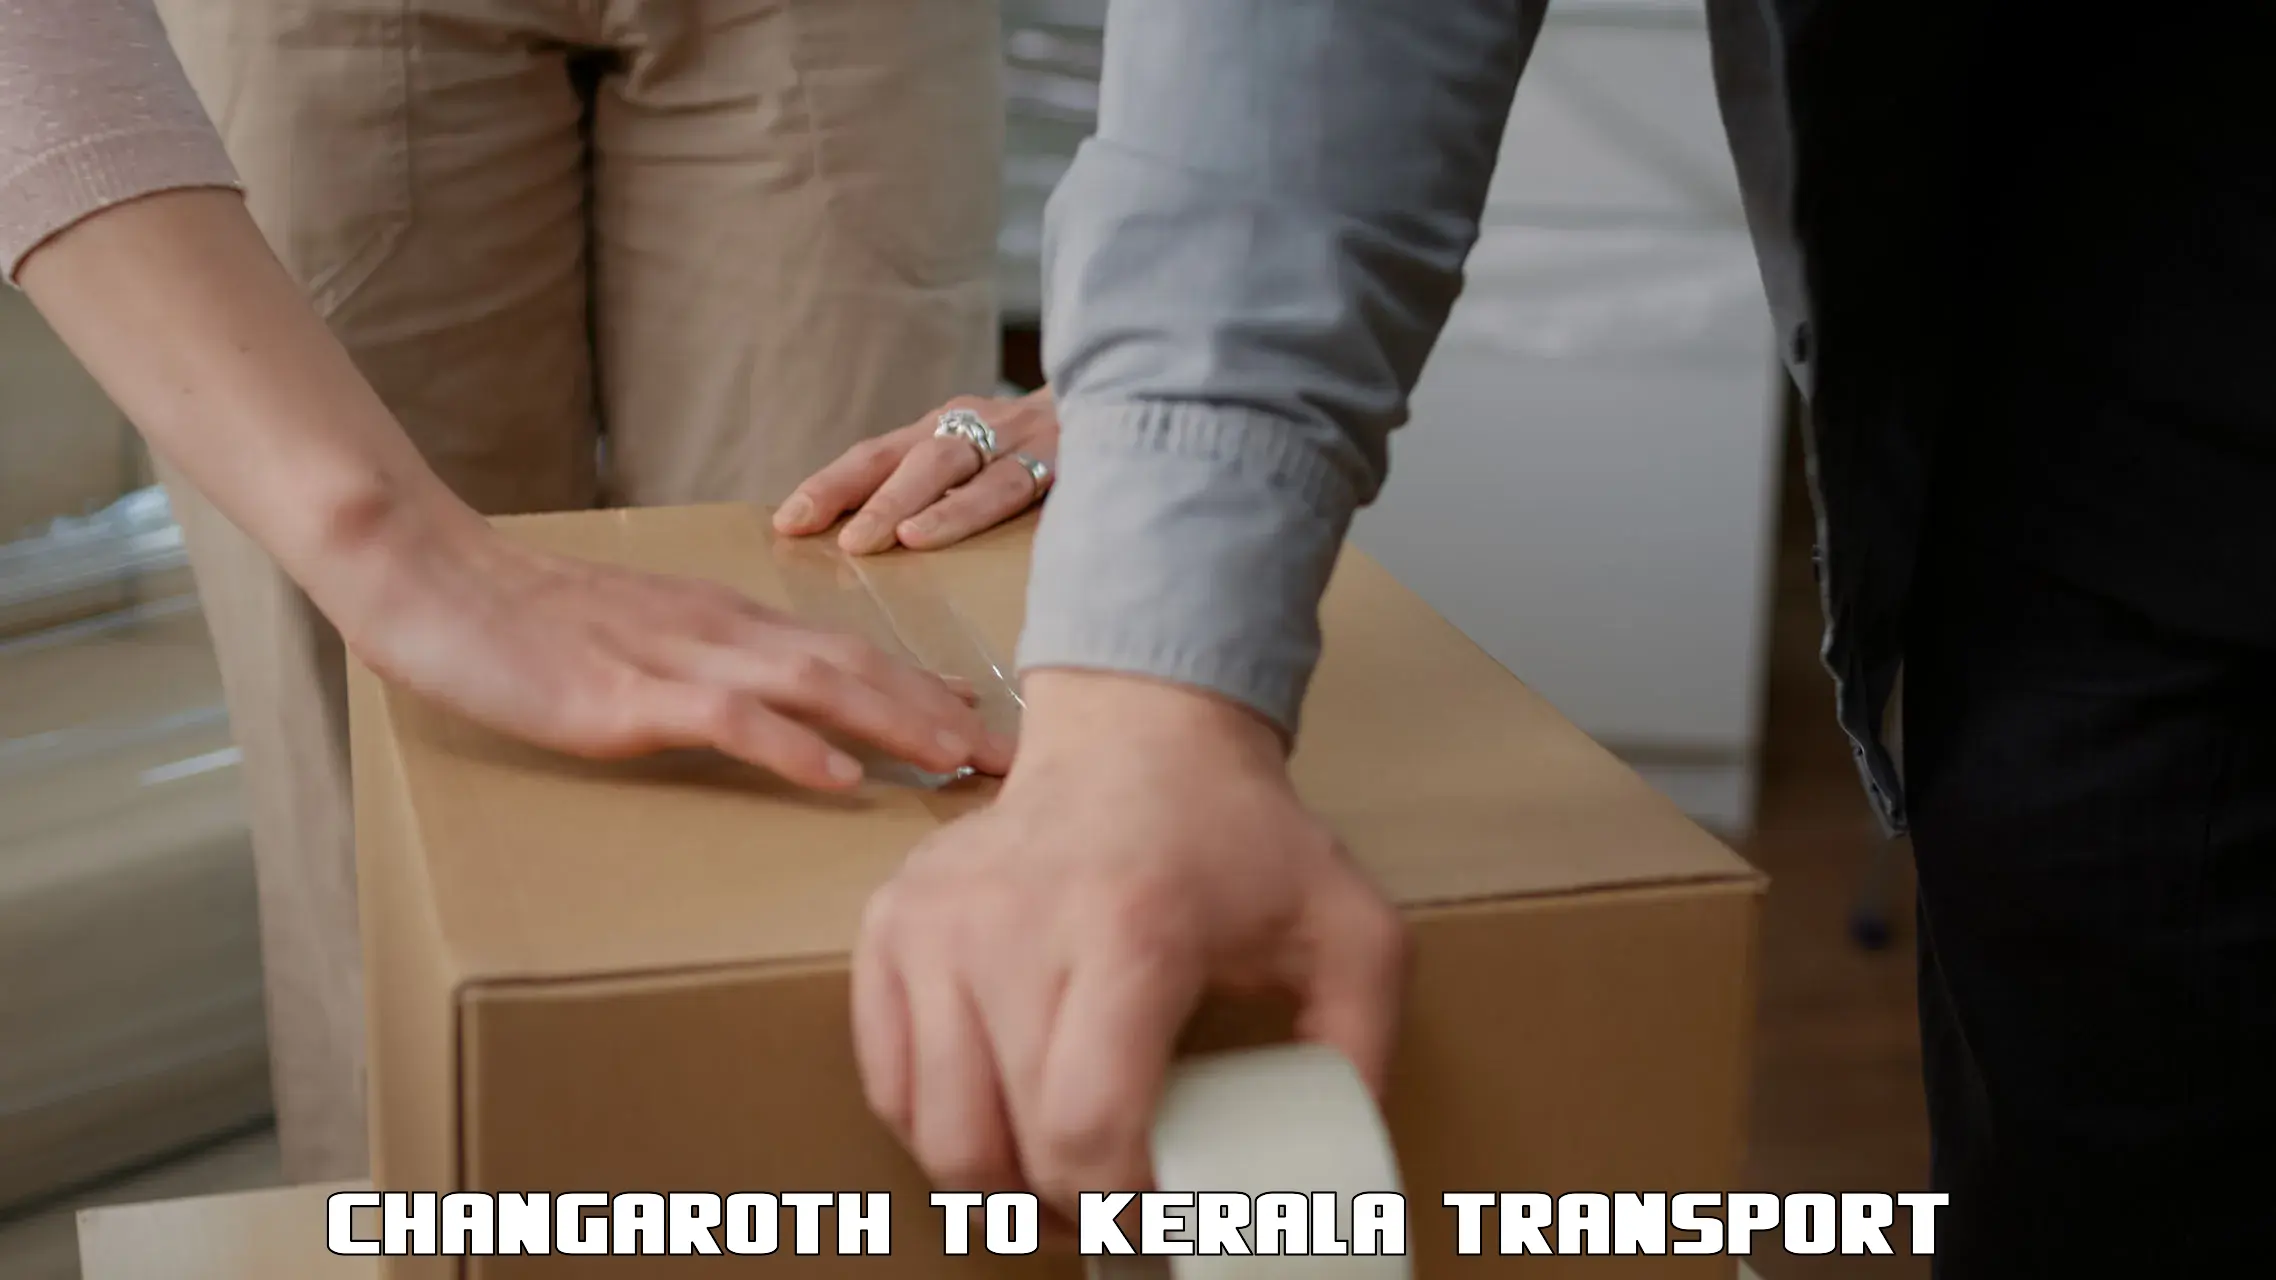 Express transport services Changaroth to Perumbavoor